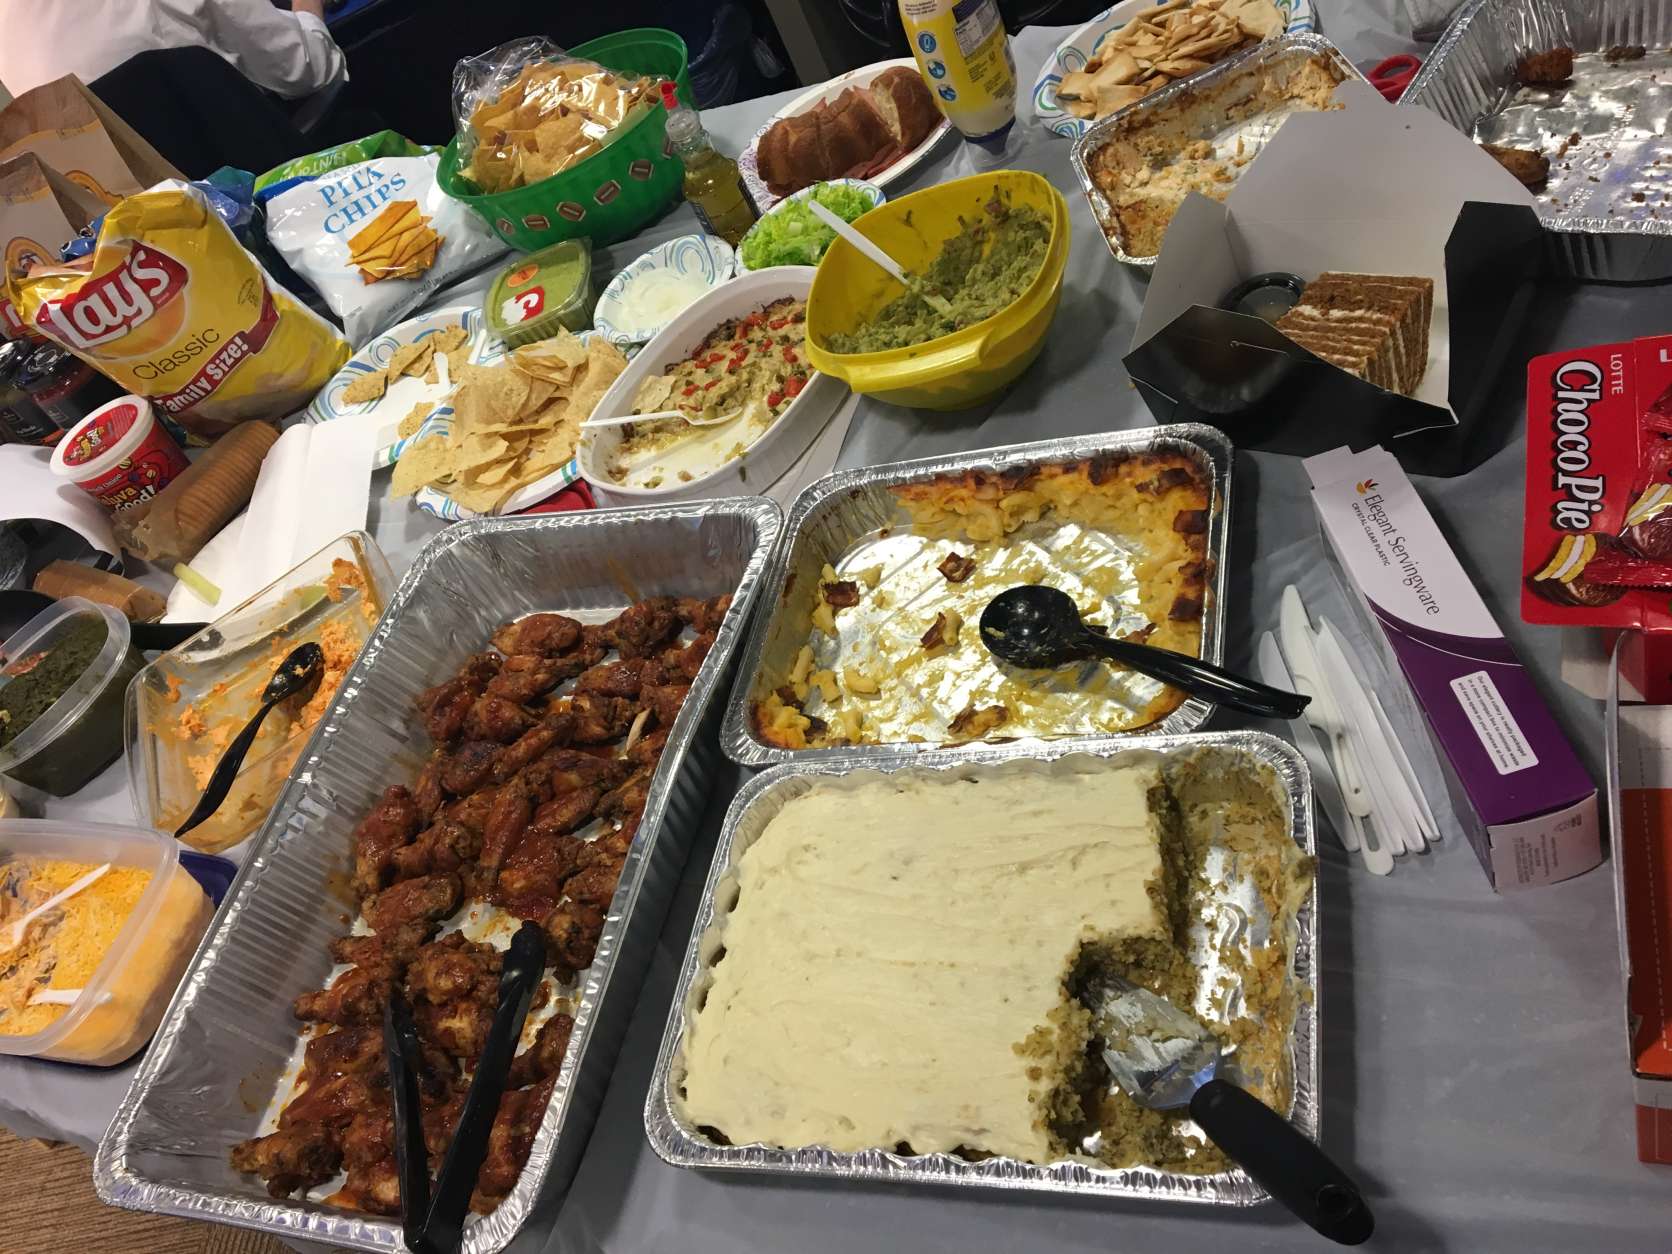 WTOP staffers feast the Friday before Superbowl 51. (WTOP/Hanna Choi)